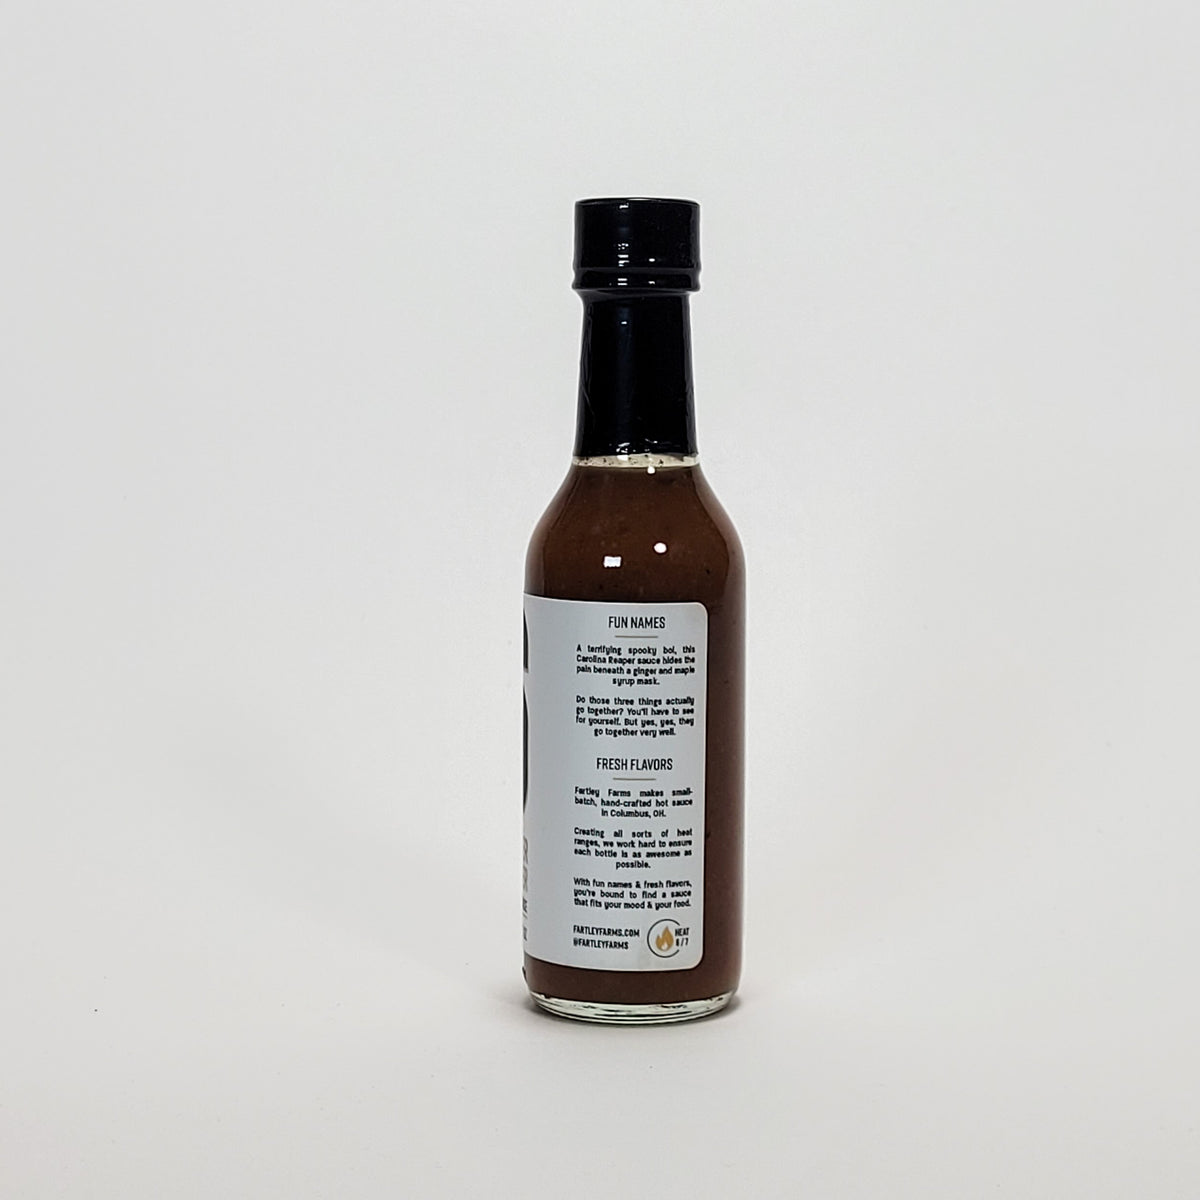 Fartley Farms Ginger Reaper hot sauce back